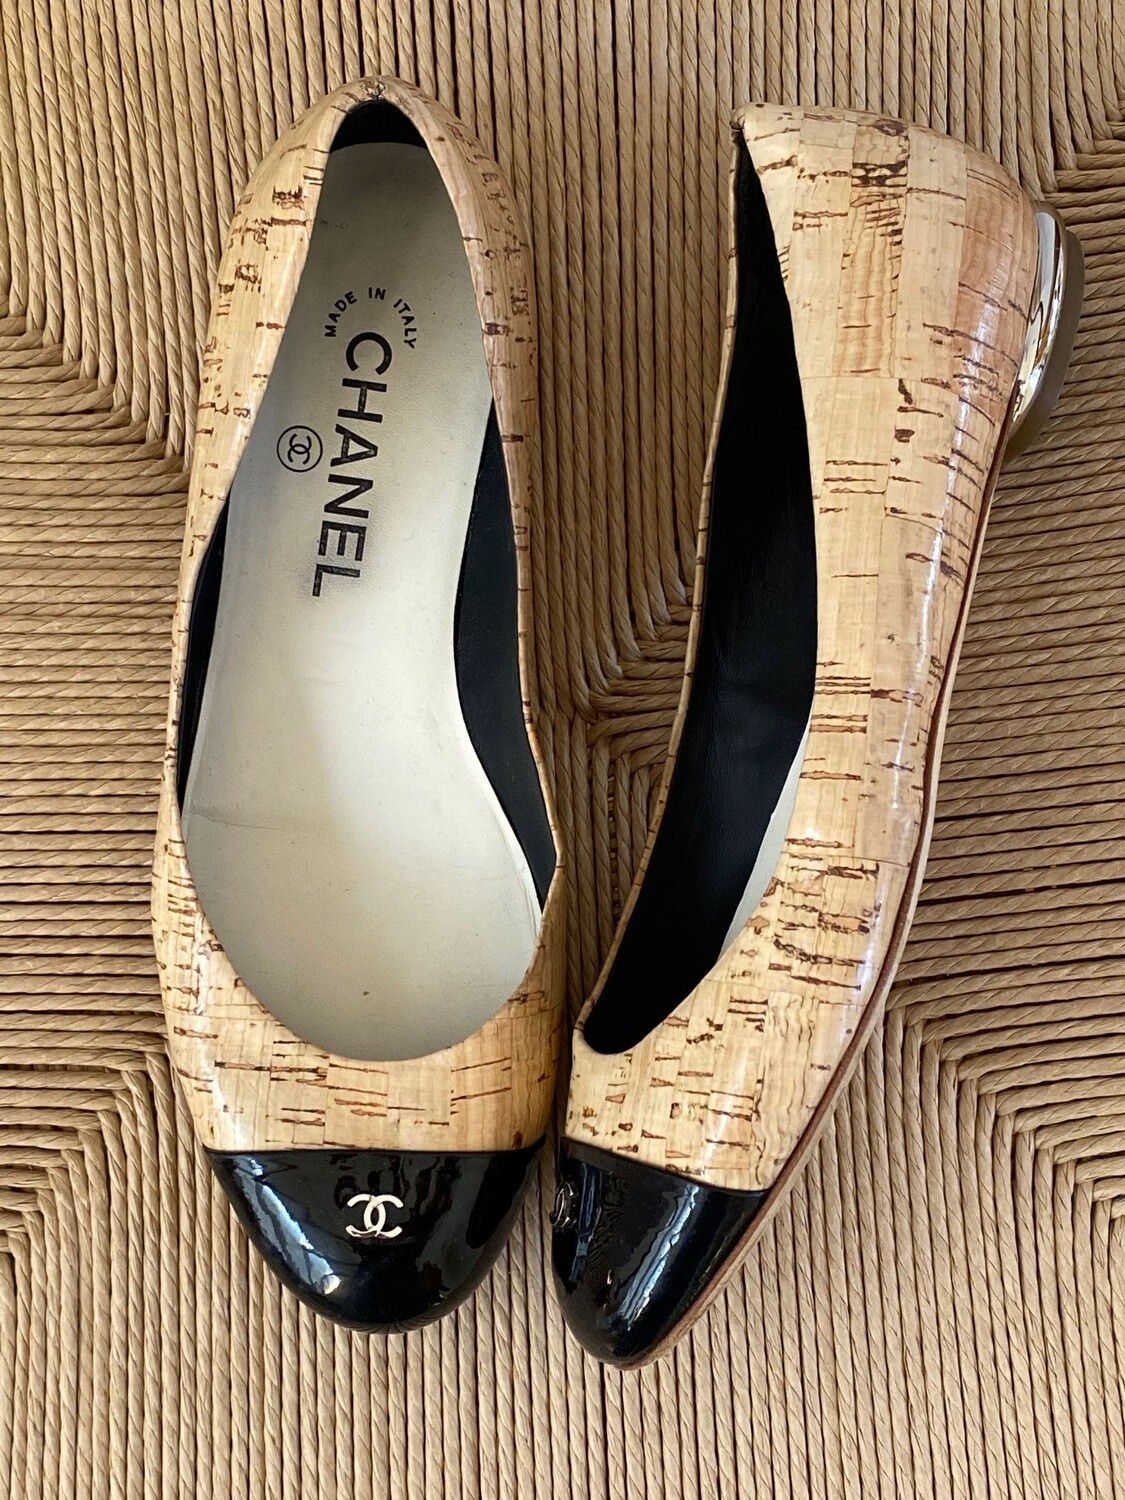 CHANEL CC LOGO CORK AND BLACK PATENT LEATHER BALLET FLATS 37 / 6 - 6.5